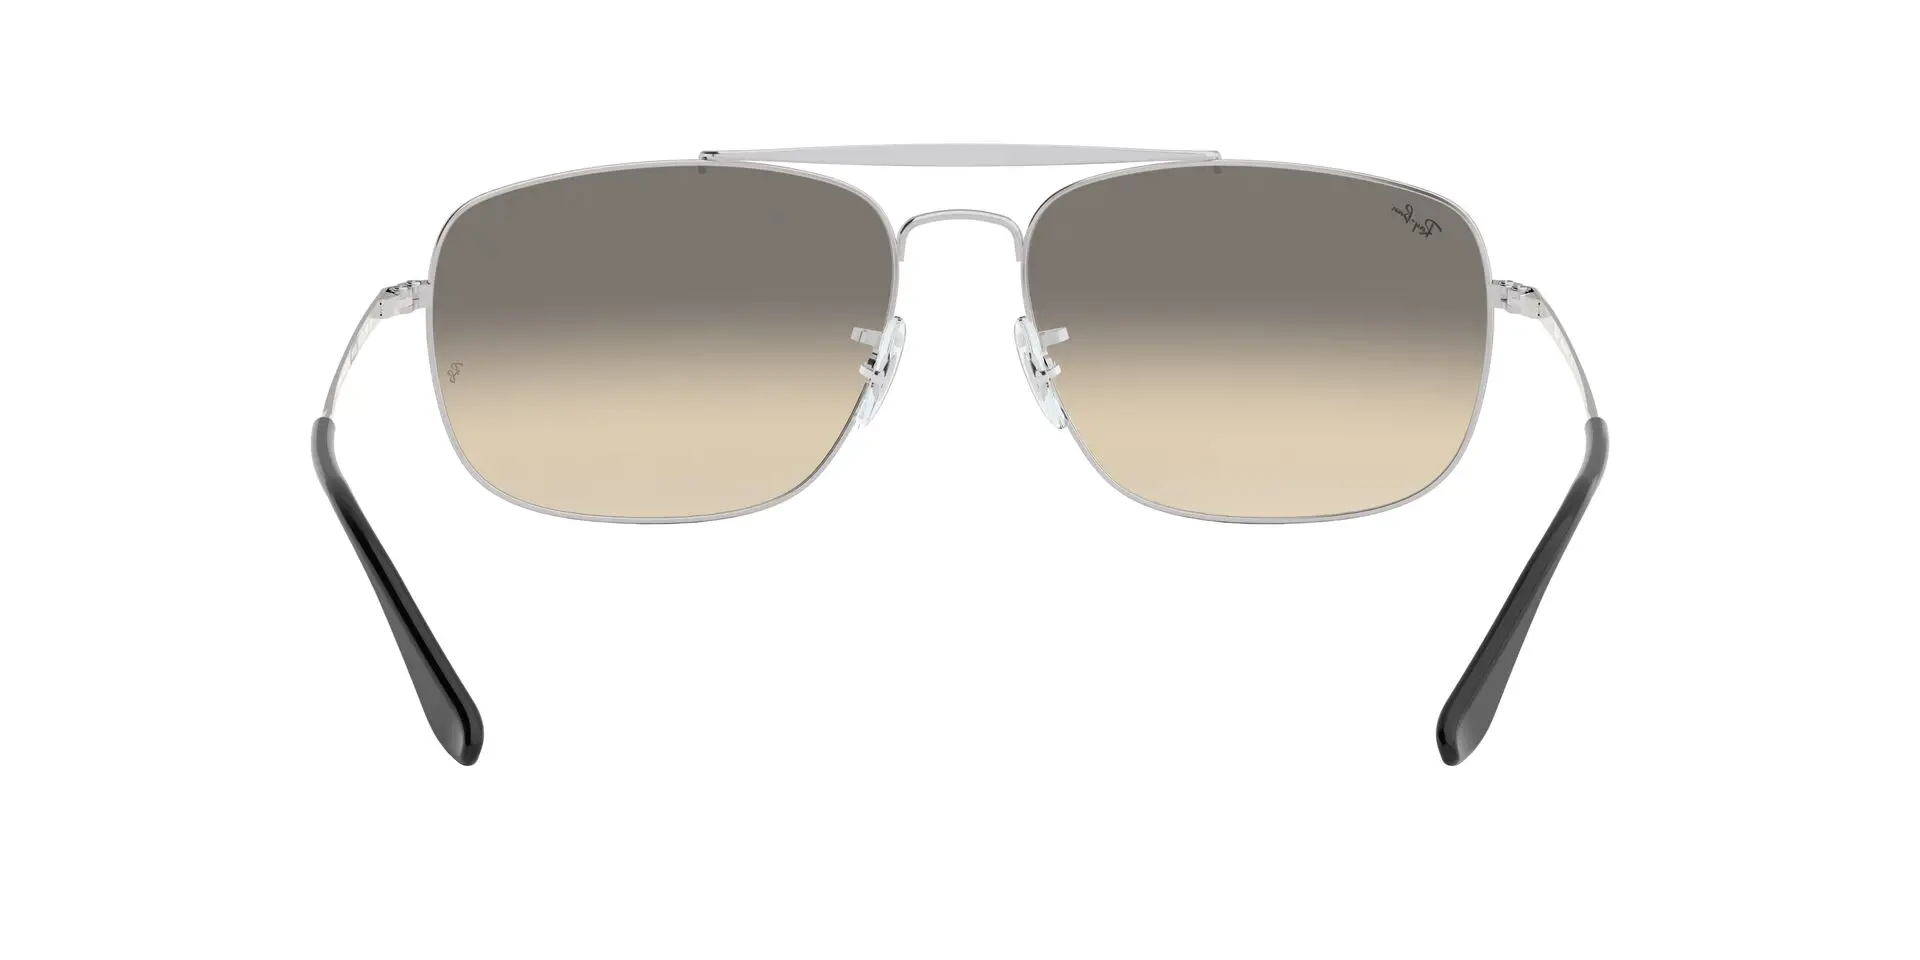 Ray-Ban Colonel RB3560 003/32